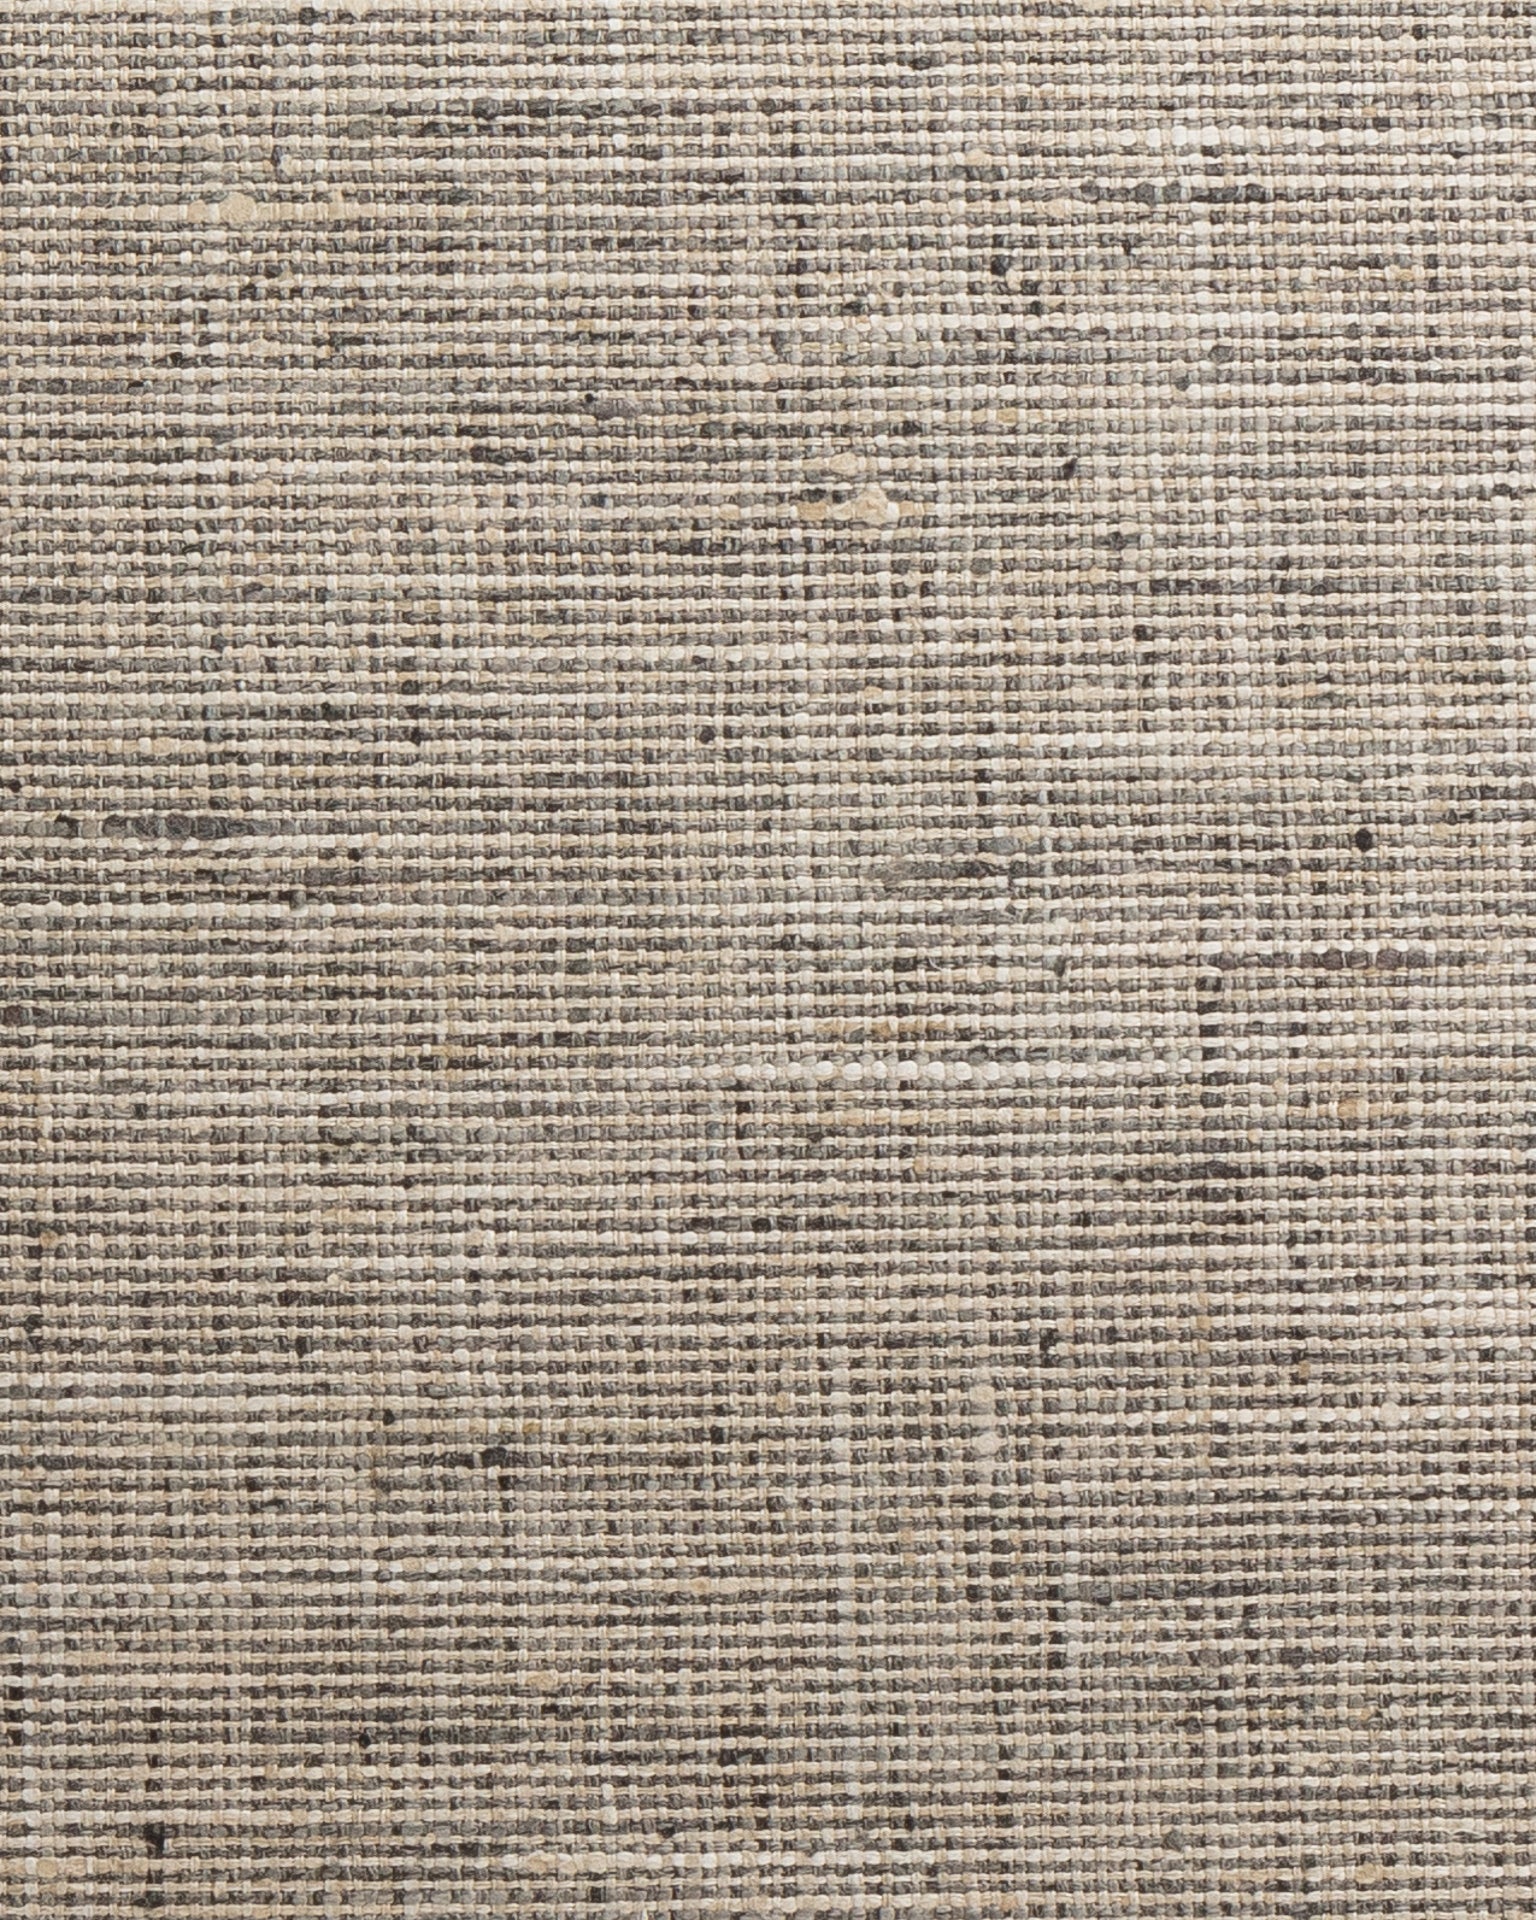 Close-up texture of a Grasscloth Steel 24x24&quot; fabric in a bungalow, with a woven, slightly rough texture showing horizontal and vertical thread patterns. (Brand: Gabby)